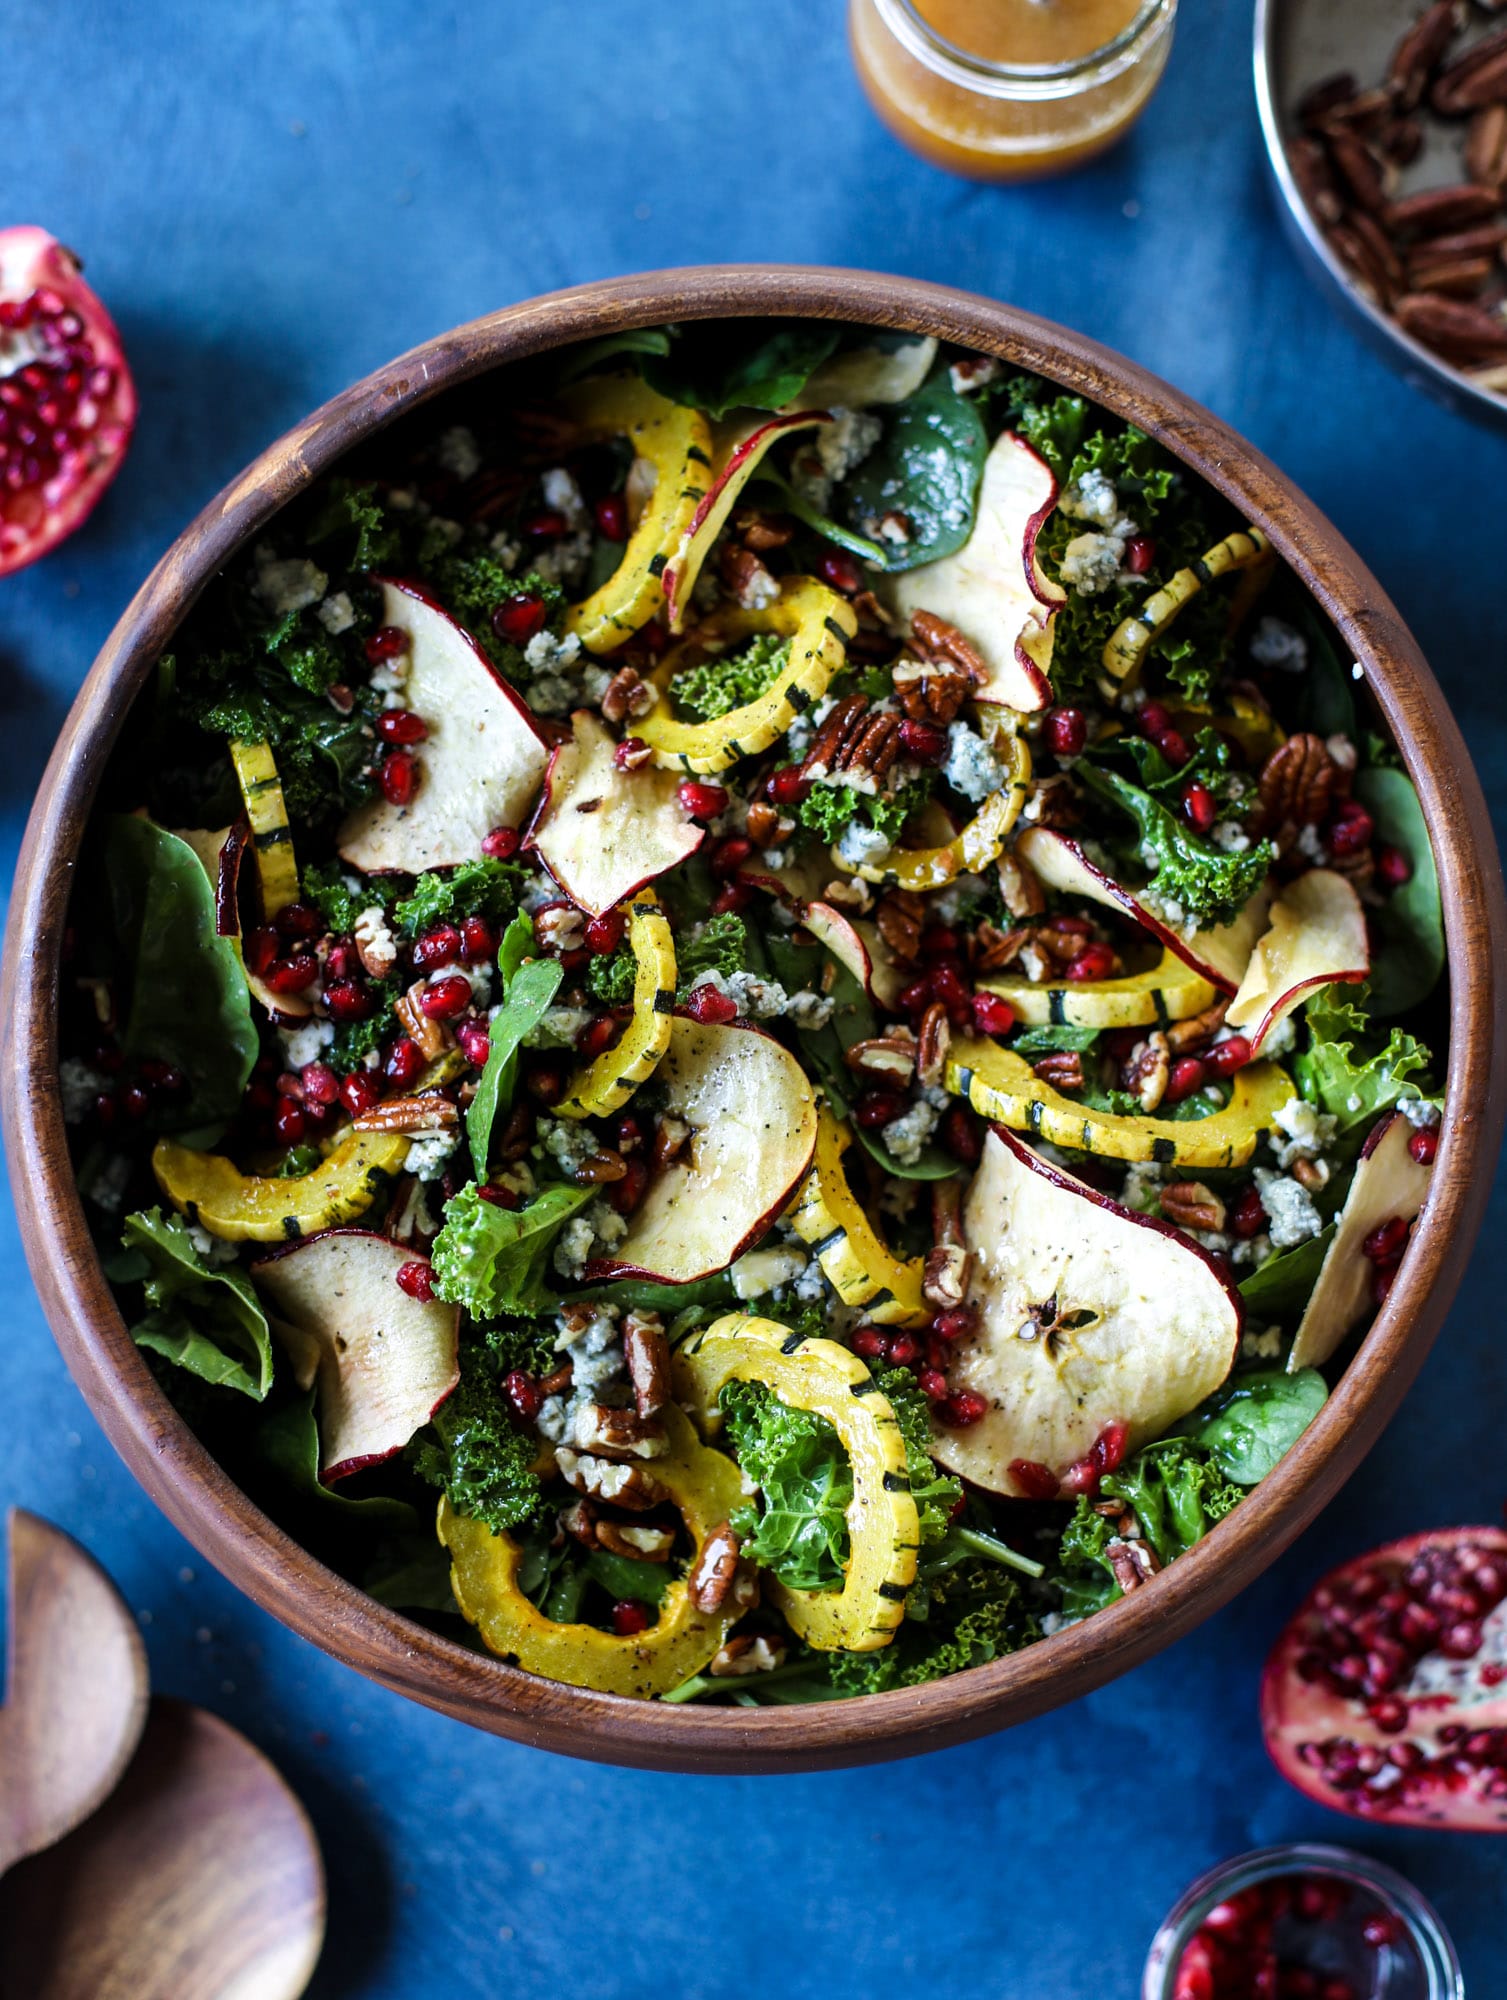 This thanksgiving salad is full of so much autumn flavor. It has toasted pomegranate, delicata squash, toasted pecans, creamy blue cheese and crunchy apple chips. It's light enough to serve before the big meal! I howsweeteats.com #thanksgiving #salad